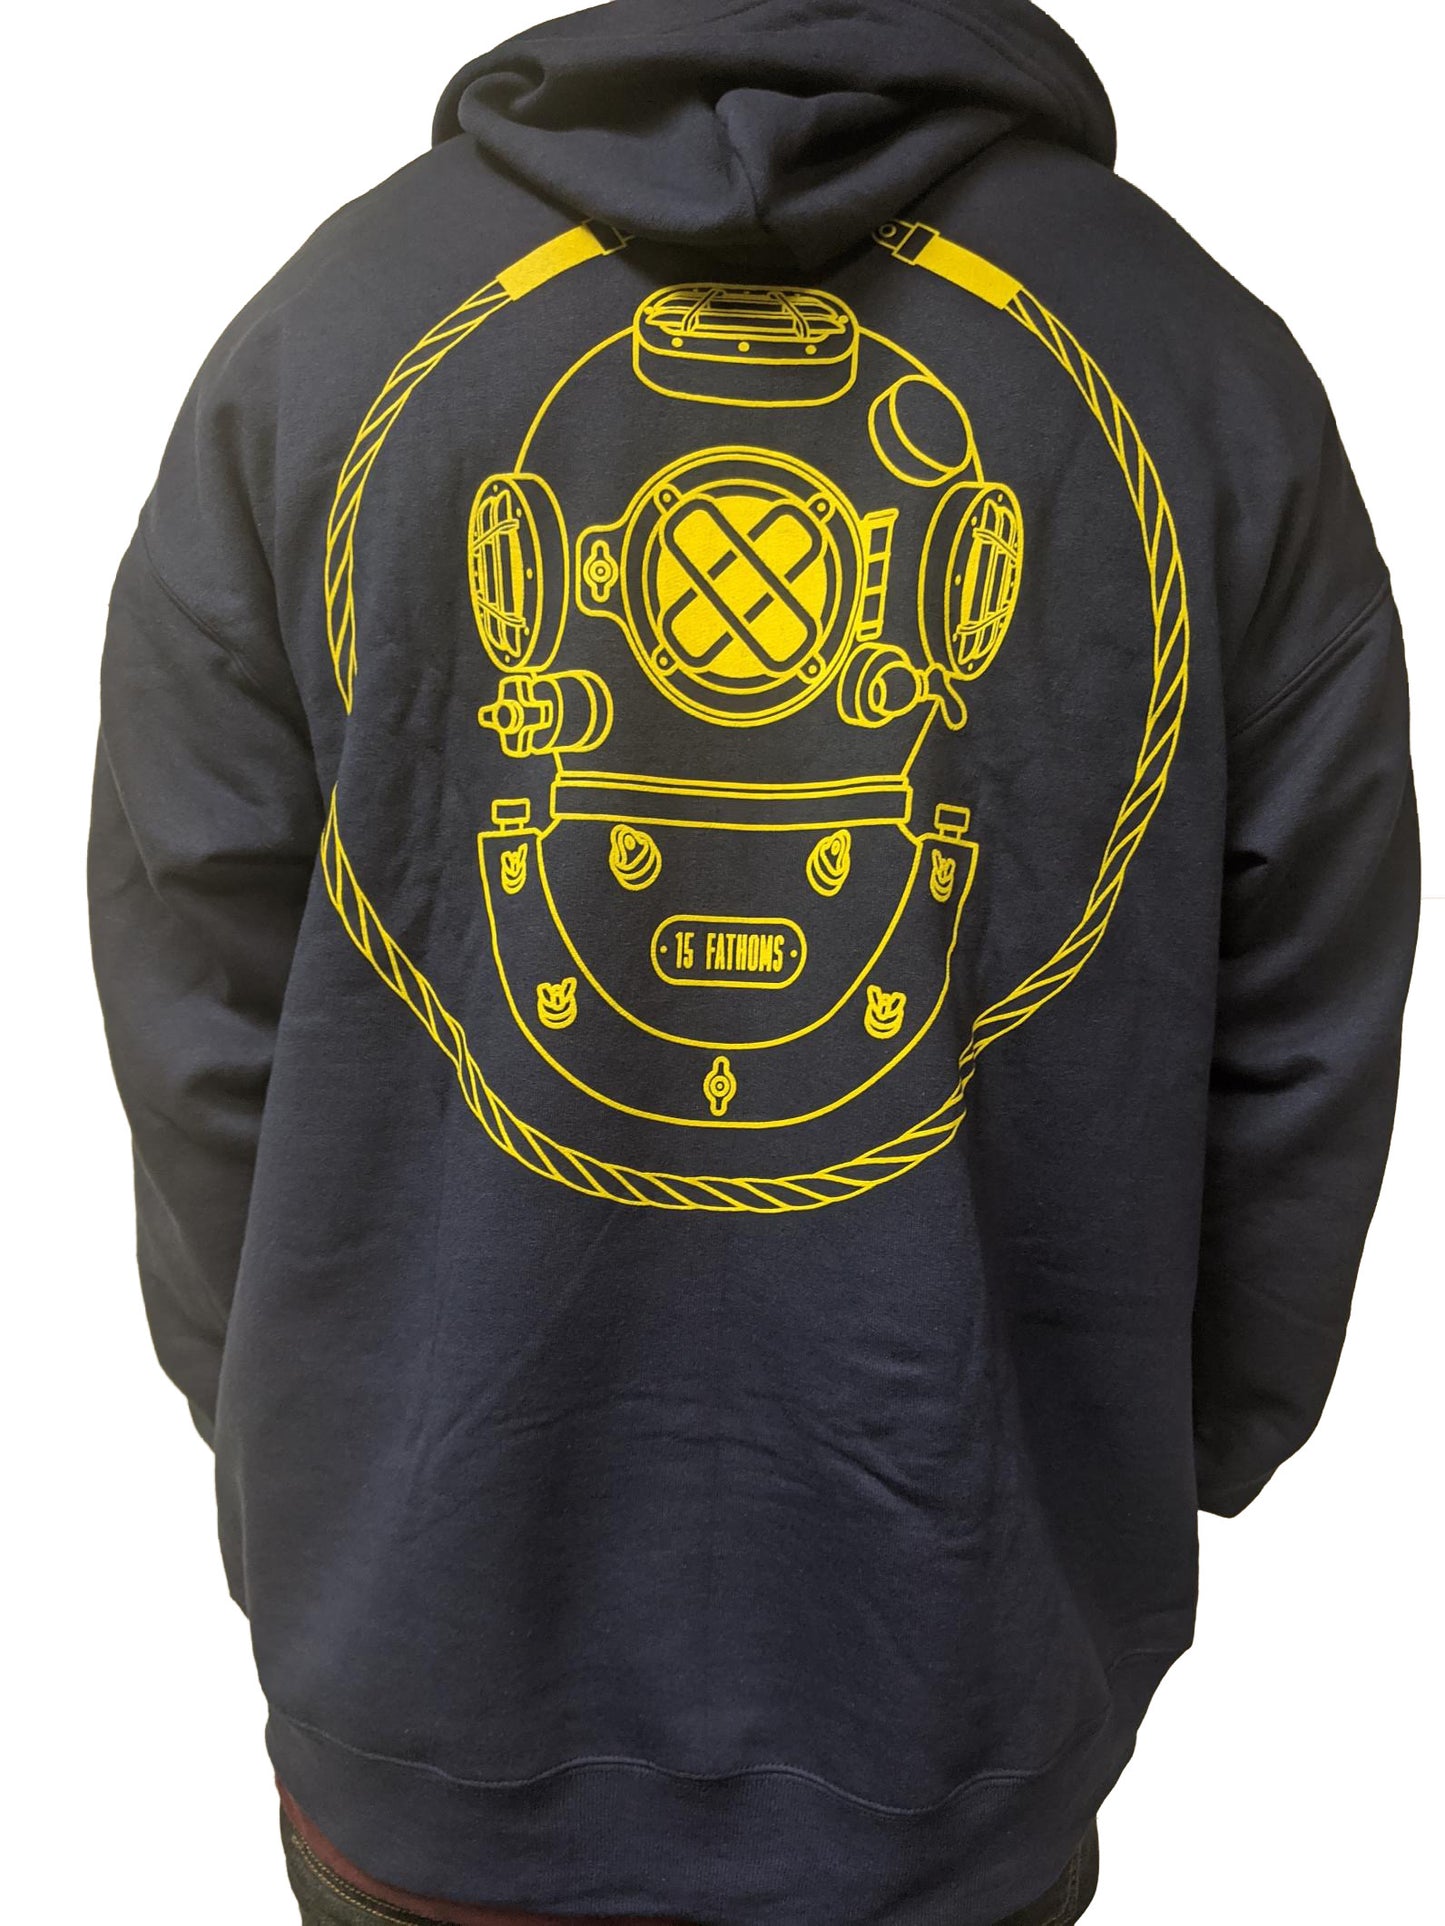 Your favorite design now displayed loud and proud on the back of a super comfy, wash tested zip up hoodie! Let them know divers have arrived with this slick new outerwear.